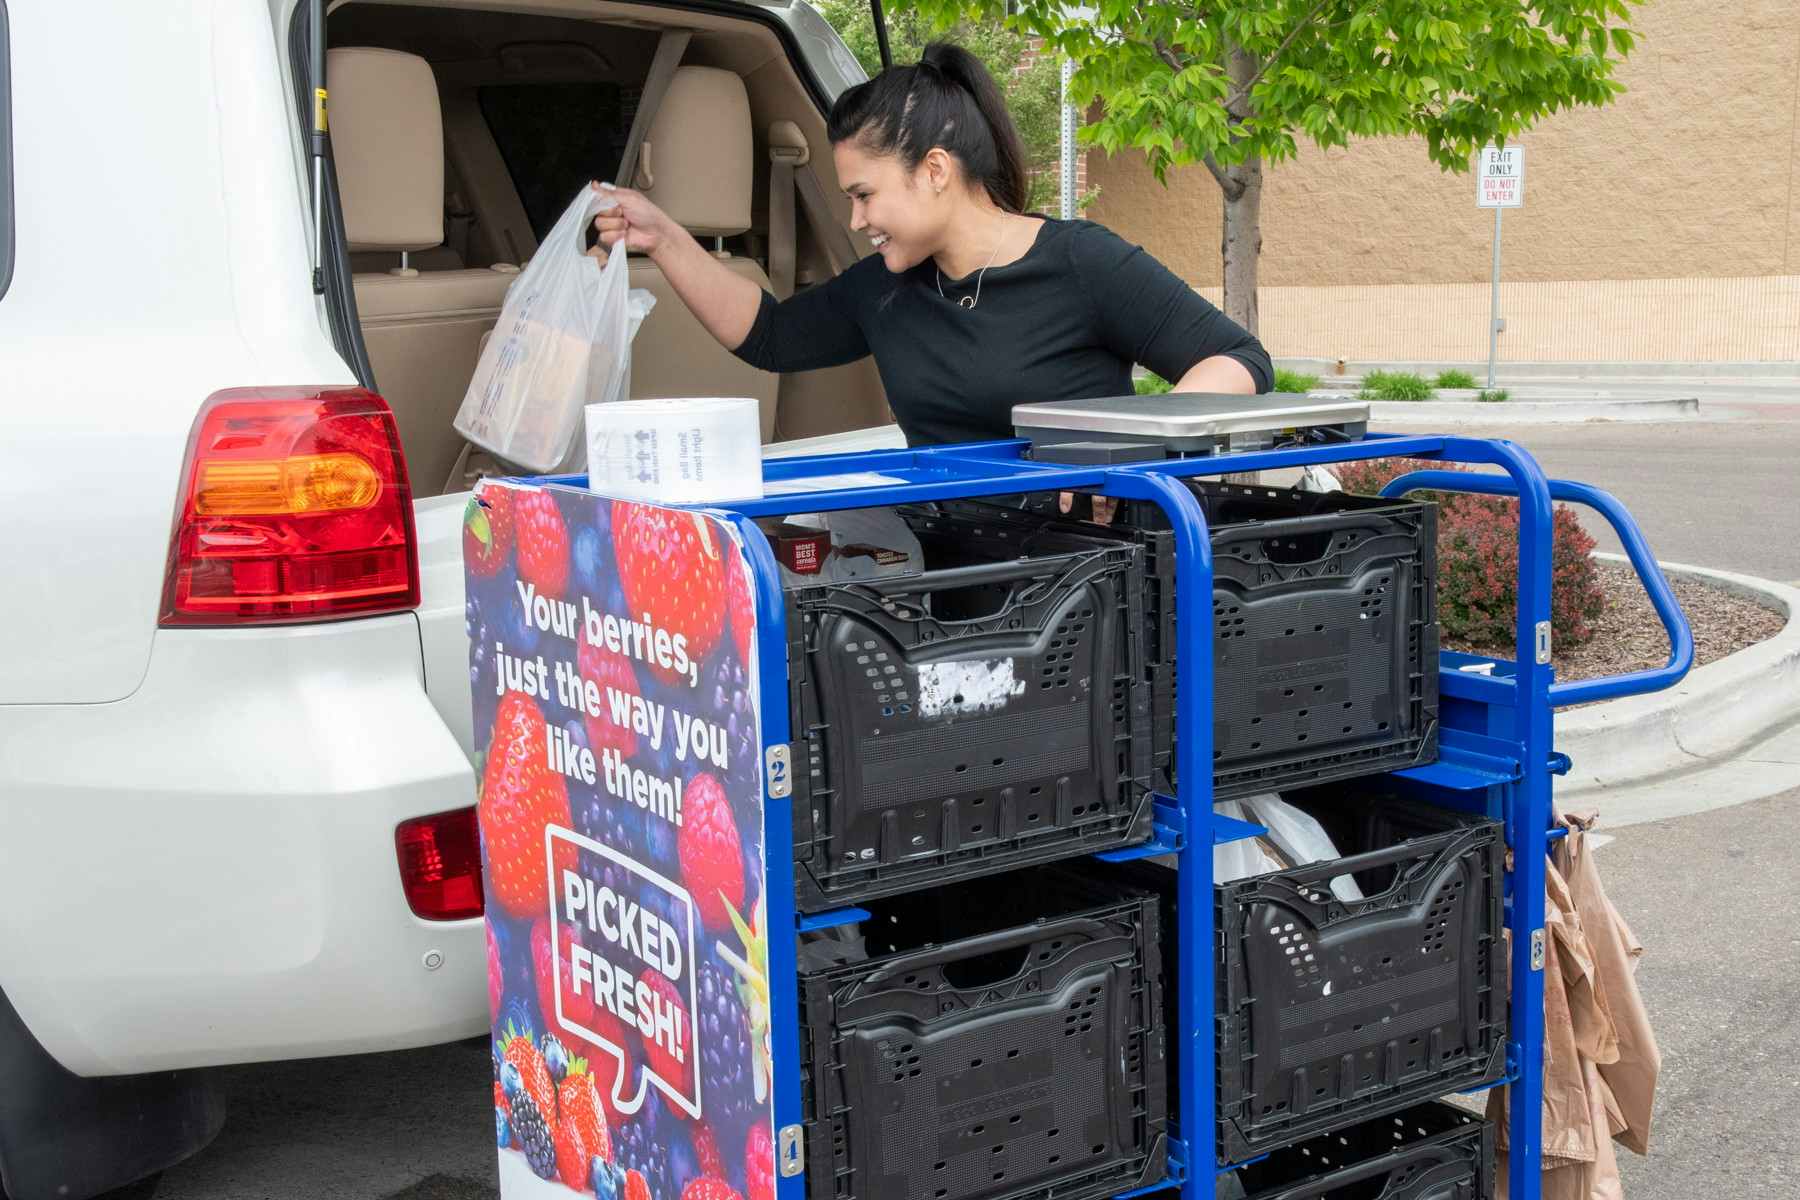 A woman loading groceries into the back of a car in a grocery pickup spot.